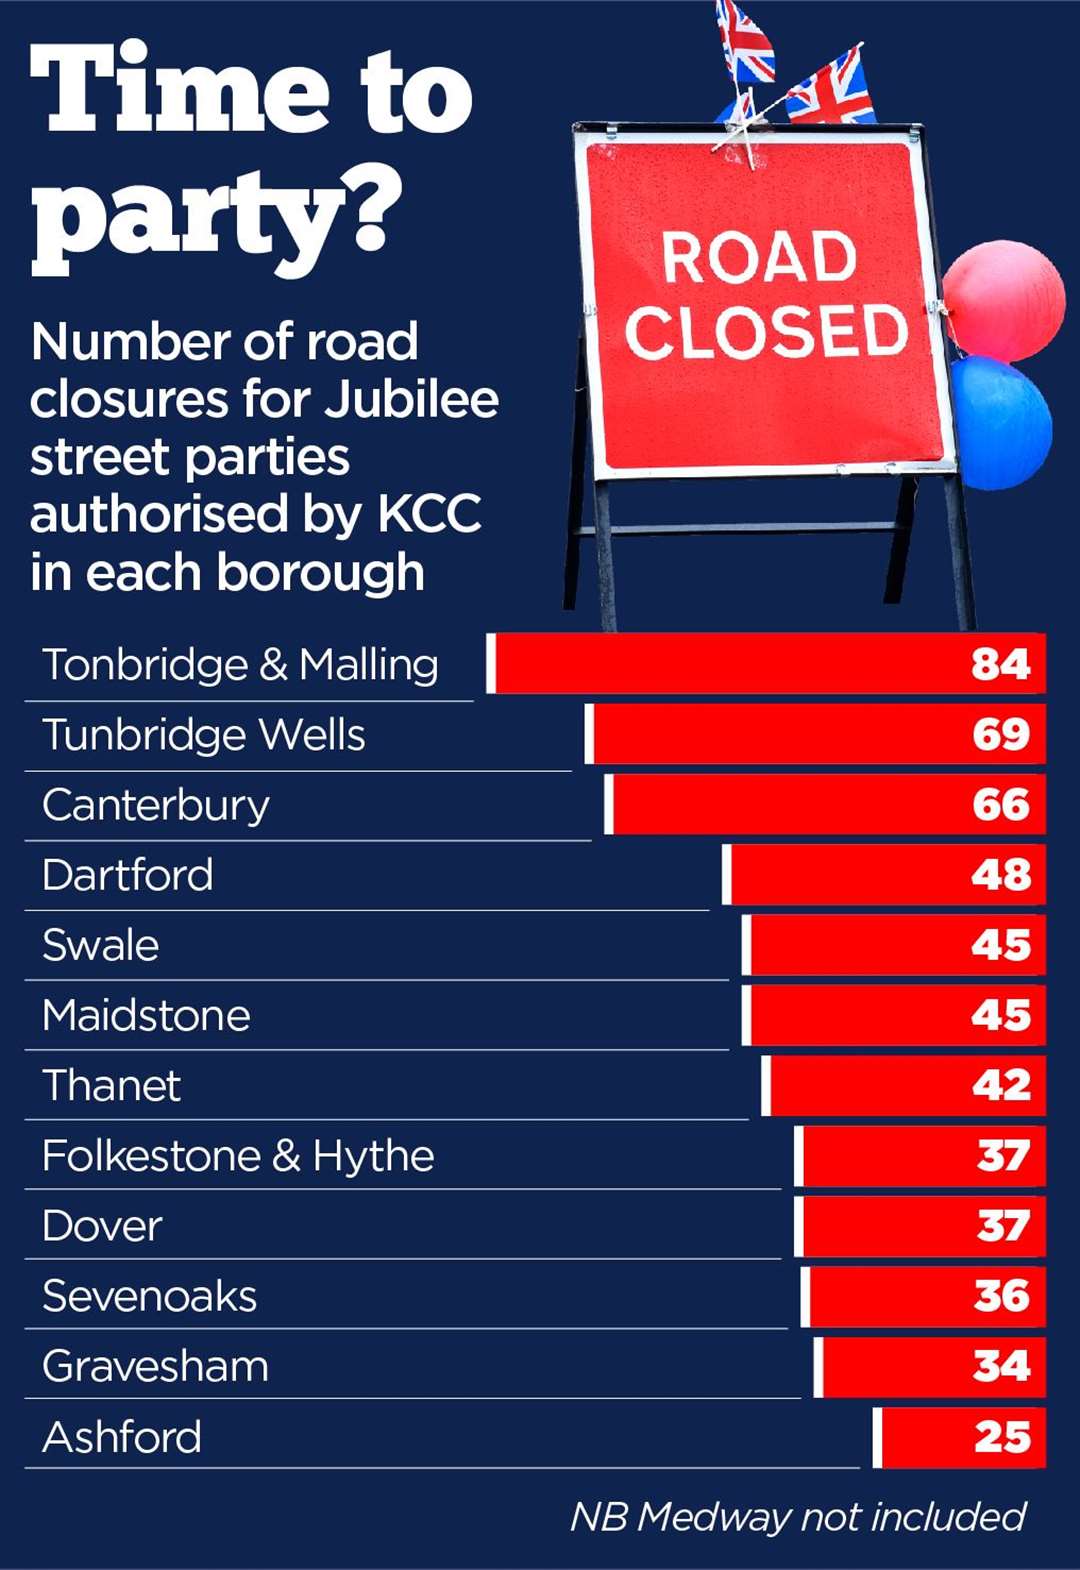 The number of Jubilee road closures